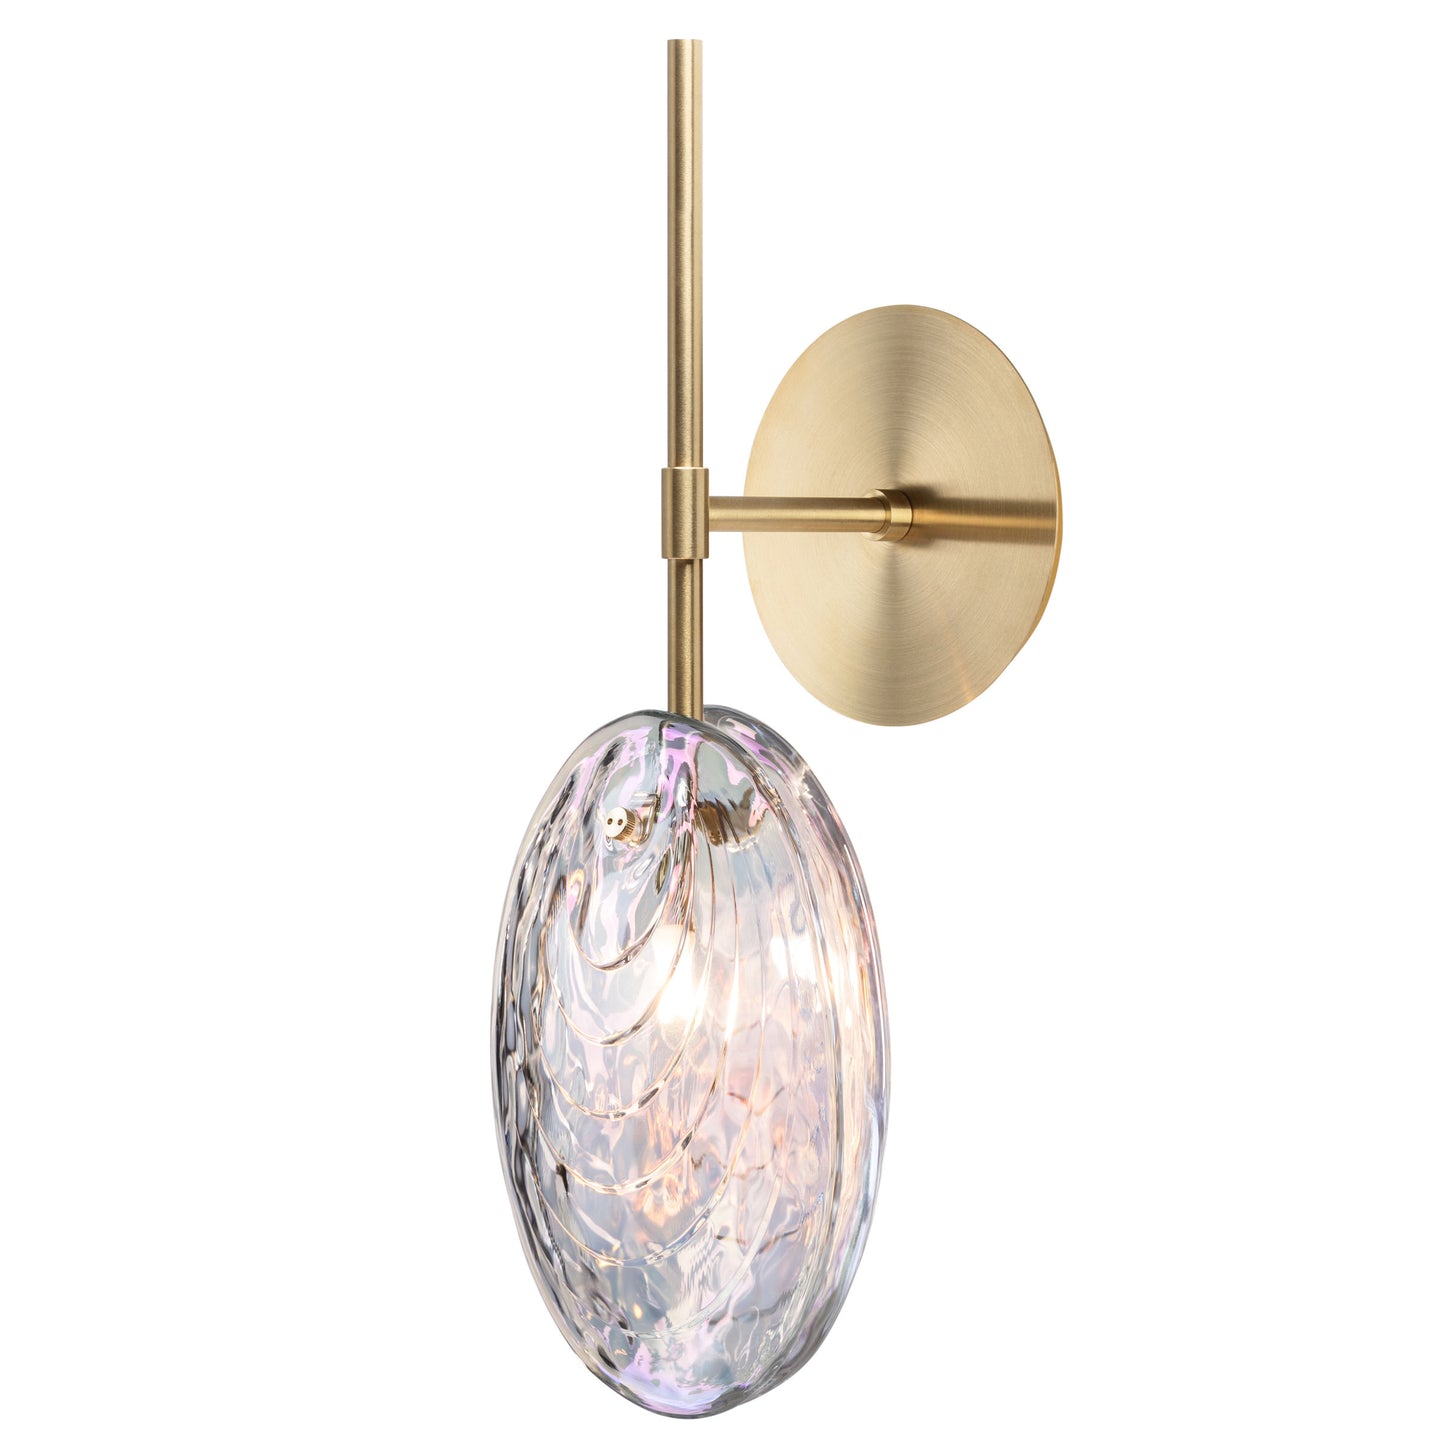 BOMMA - MUSSELS WALL SCONCE - from $1480.00